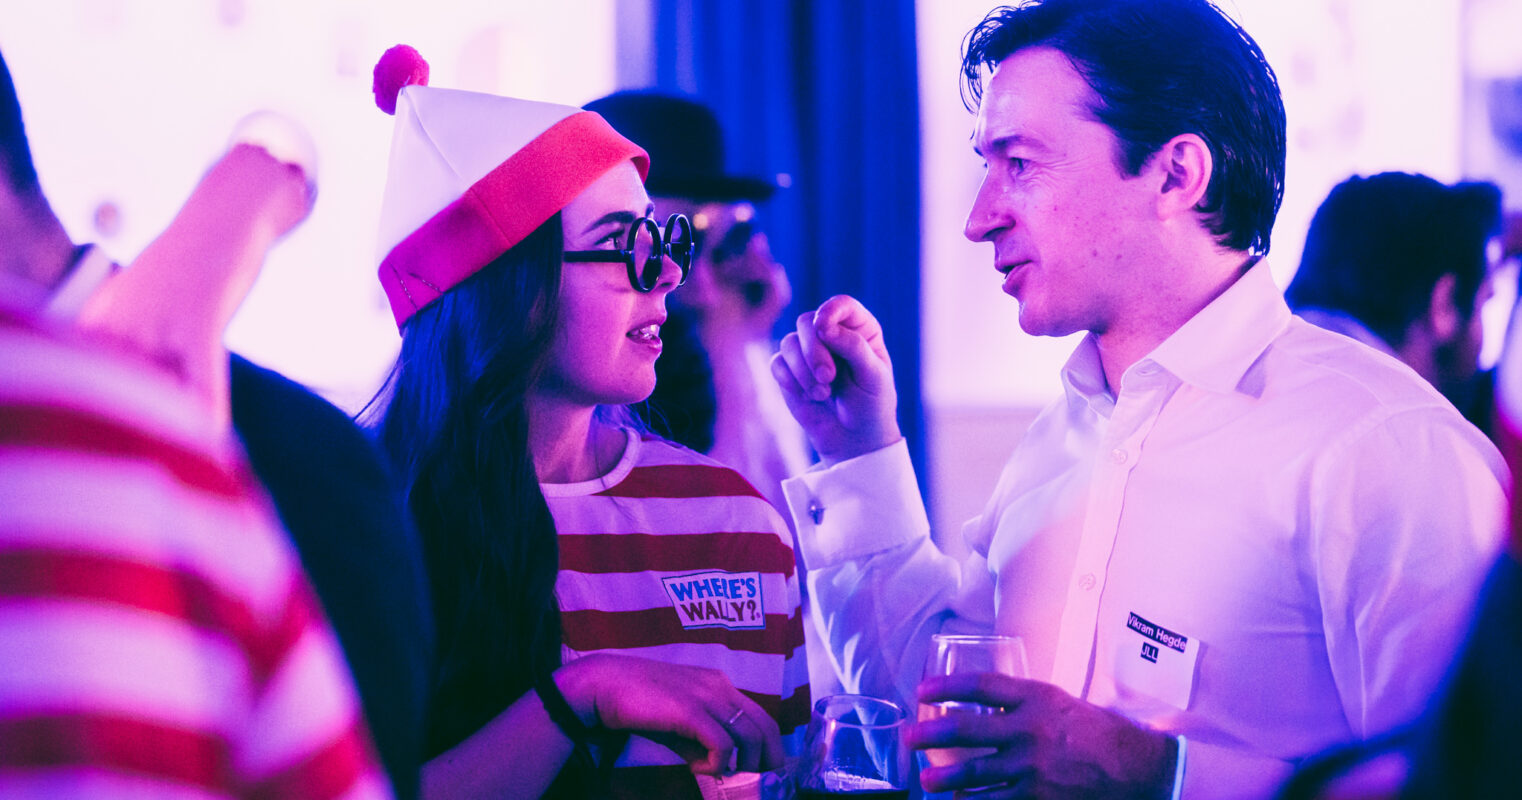 Two party-goers in 'Where's Wally' costumes share a conversation, adding a whimsical touch.